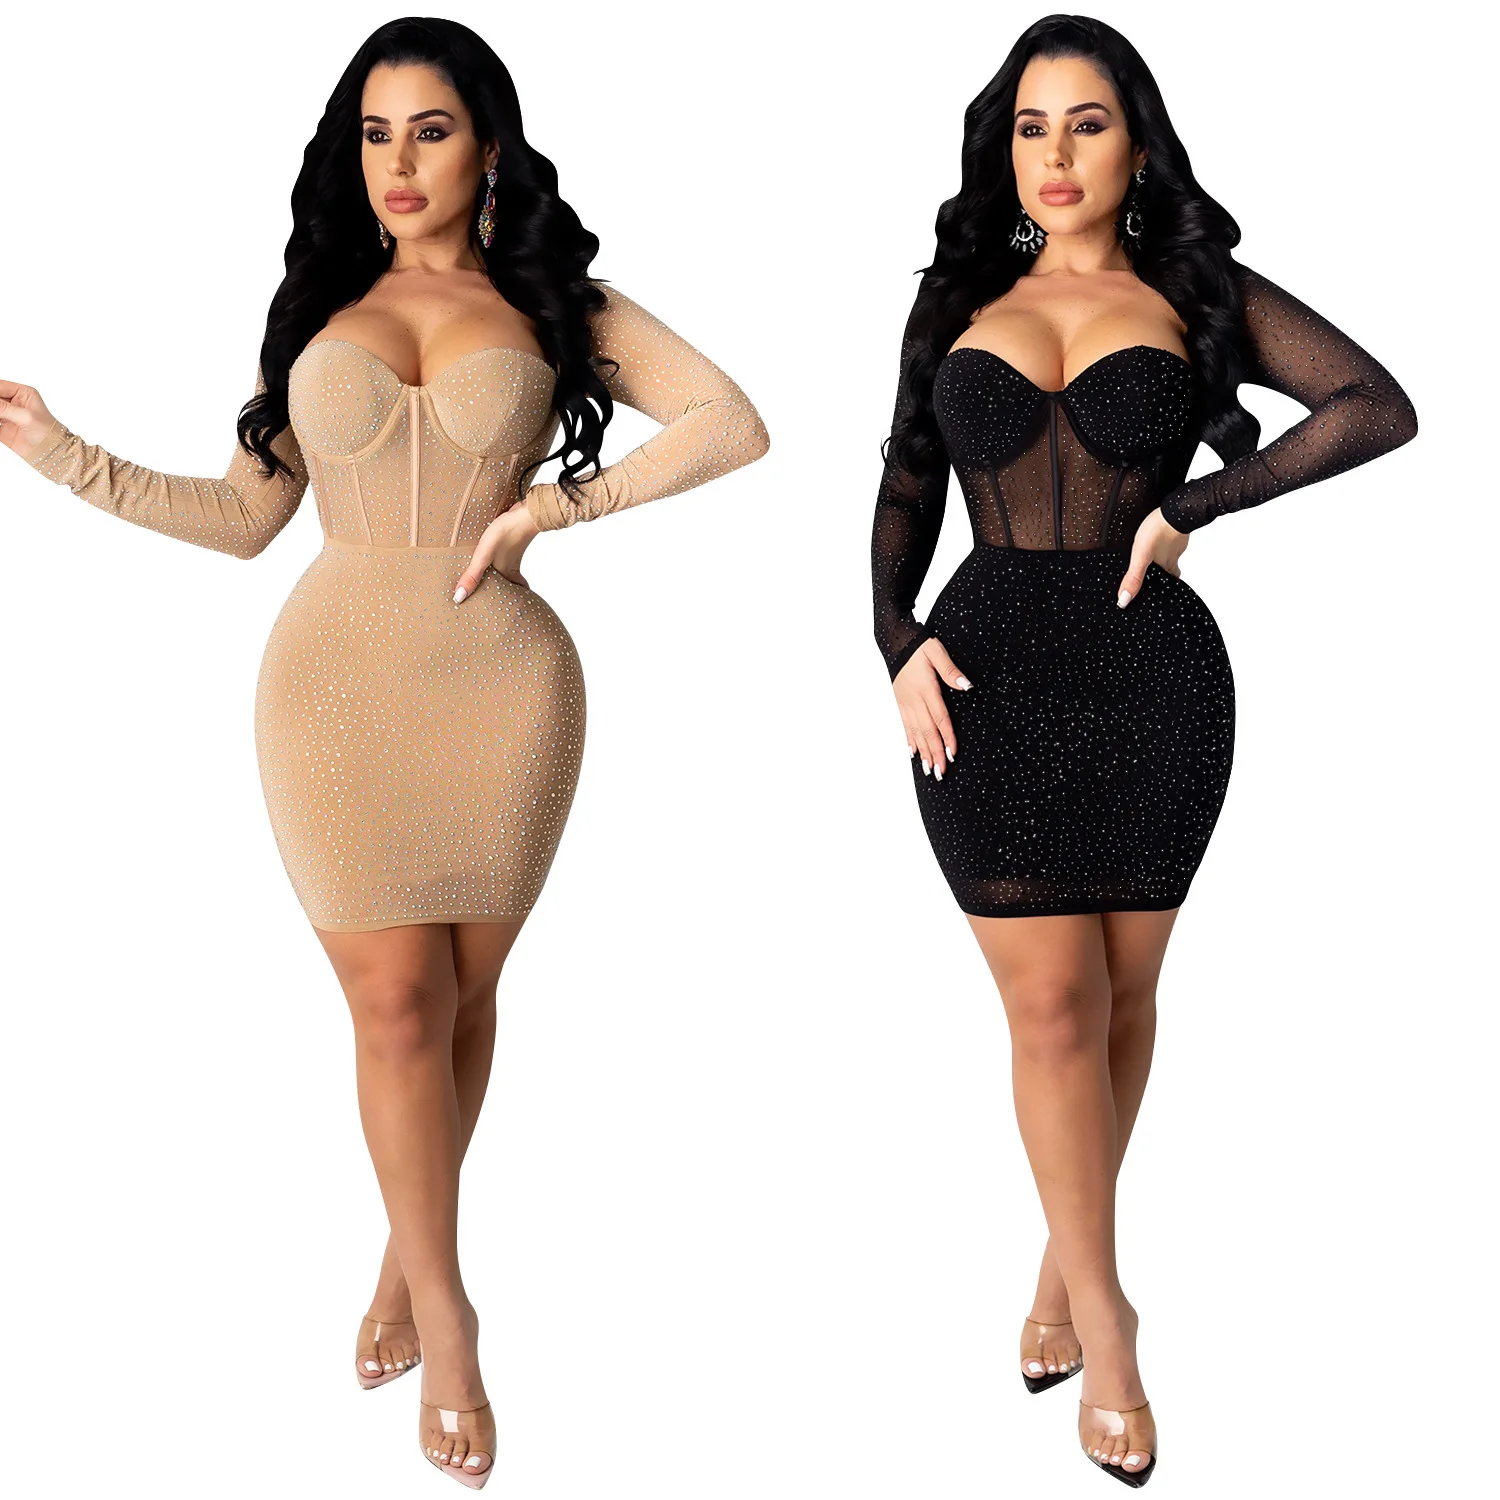 

2021 New Arrivals Ladies Party nightclub mesh see through ironing set diamond sexy skinny dress clubwear, 2 colors as picture